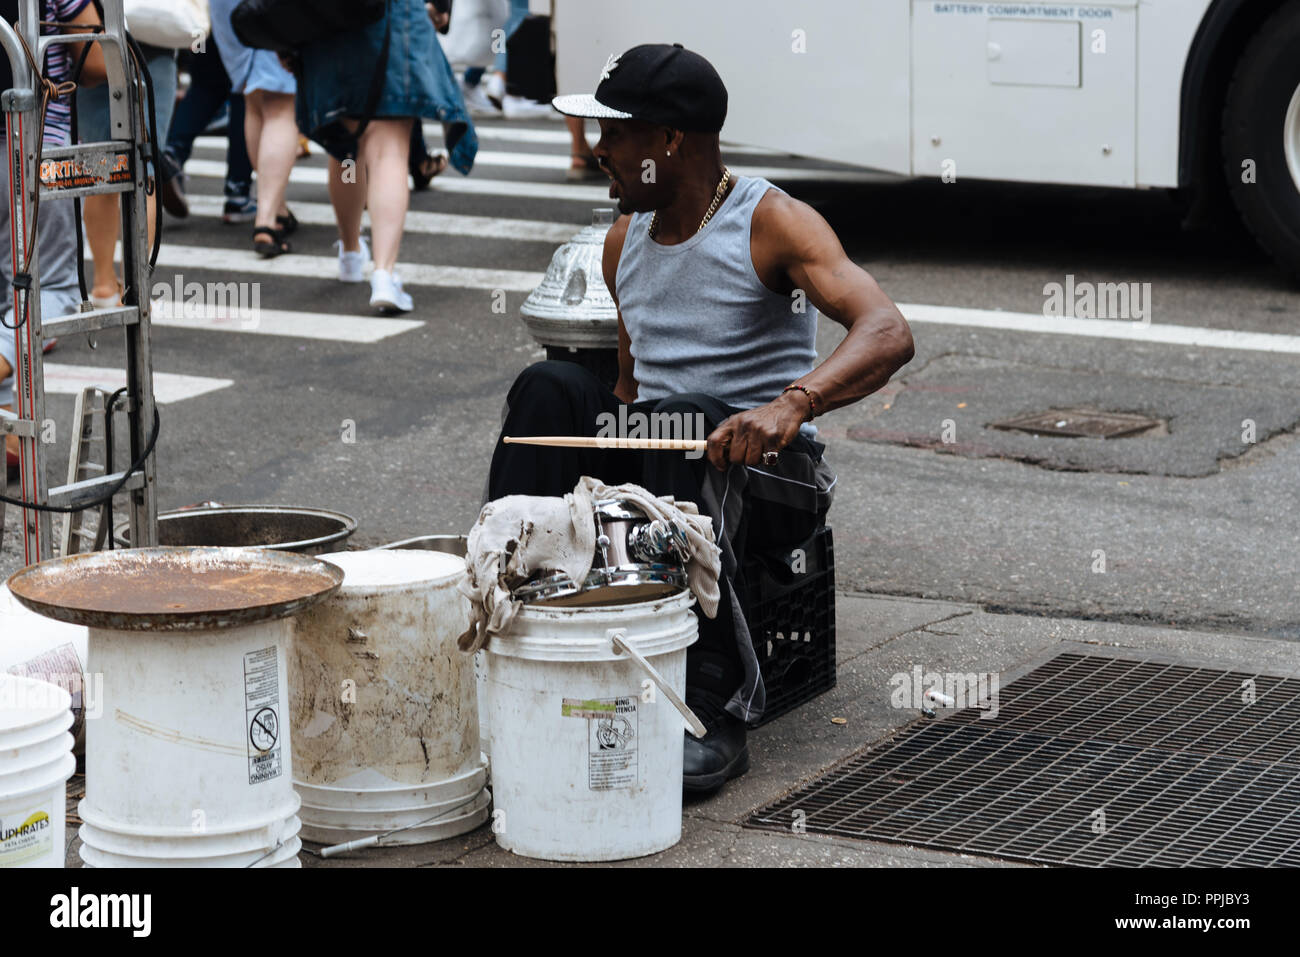 New York City, USA - June 22, 2018: Black man playing drums in New York city street Stock Photo